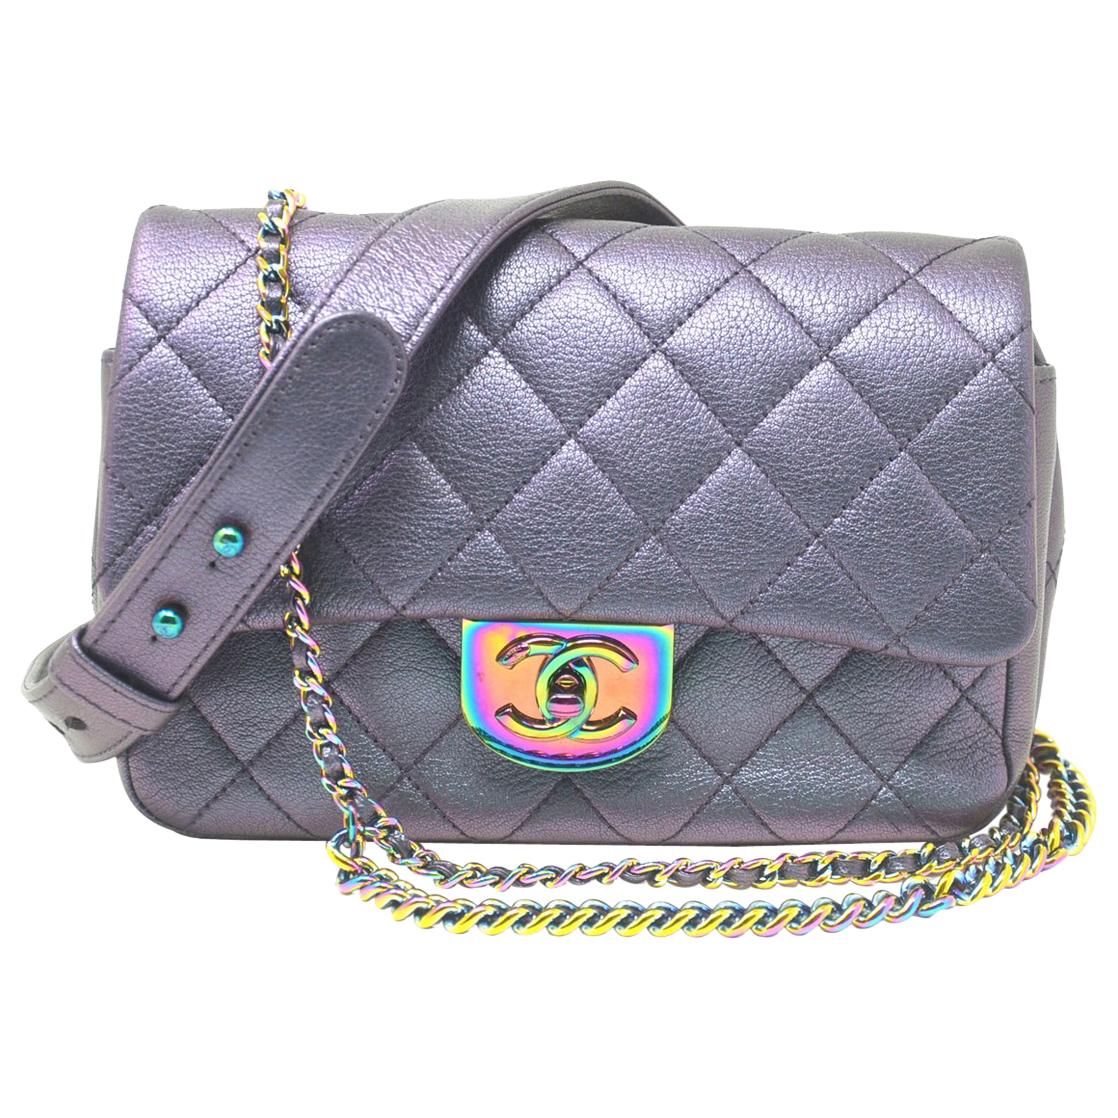 Chanel Iridescent Quilted Small Double Carry Waist Chain Flap Purple Handbag